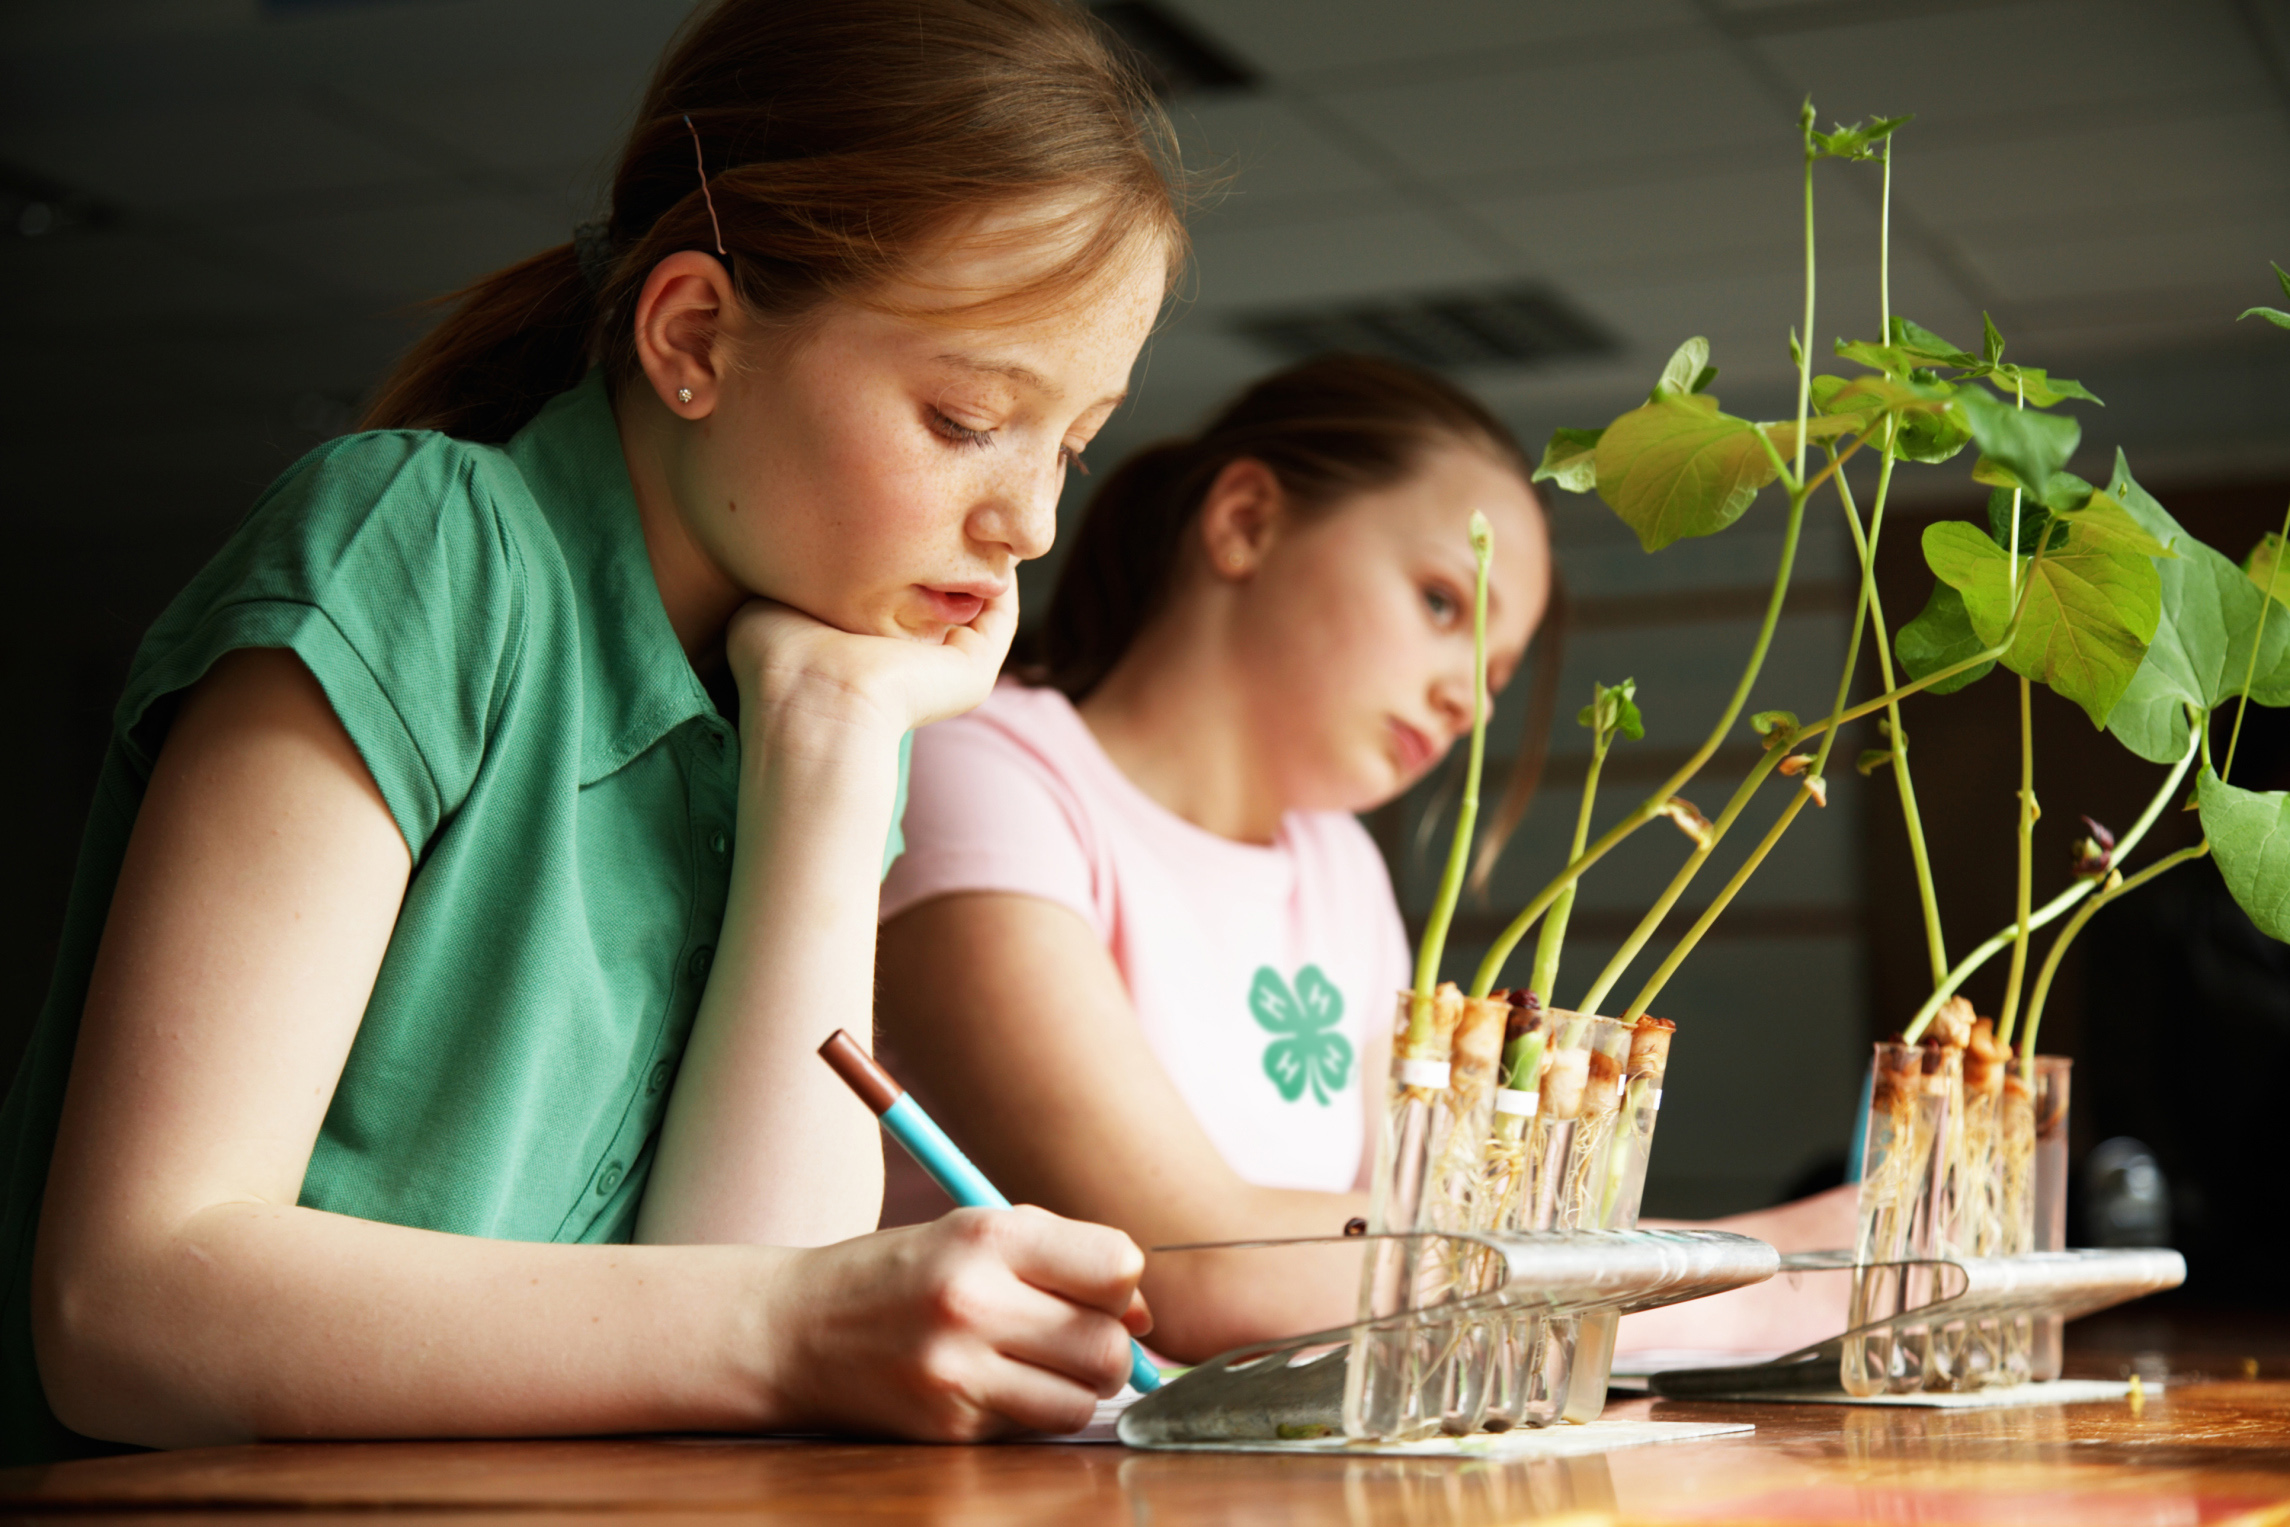 Girls working on science at school